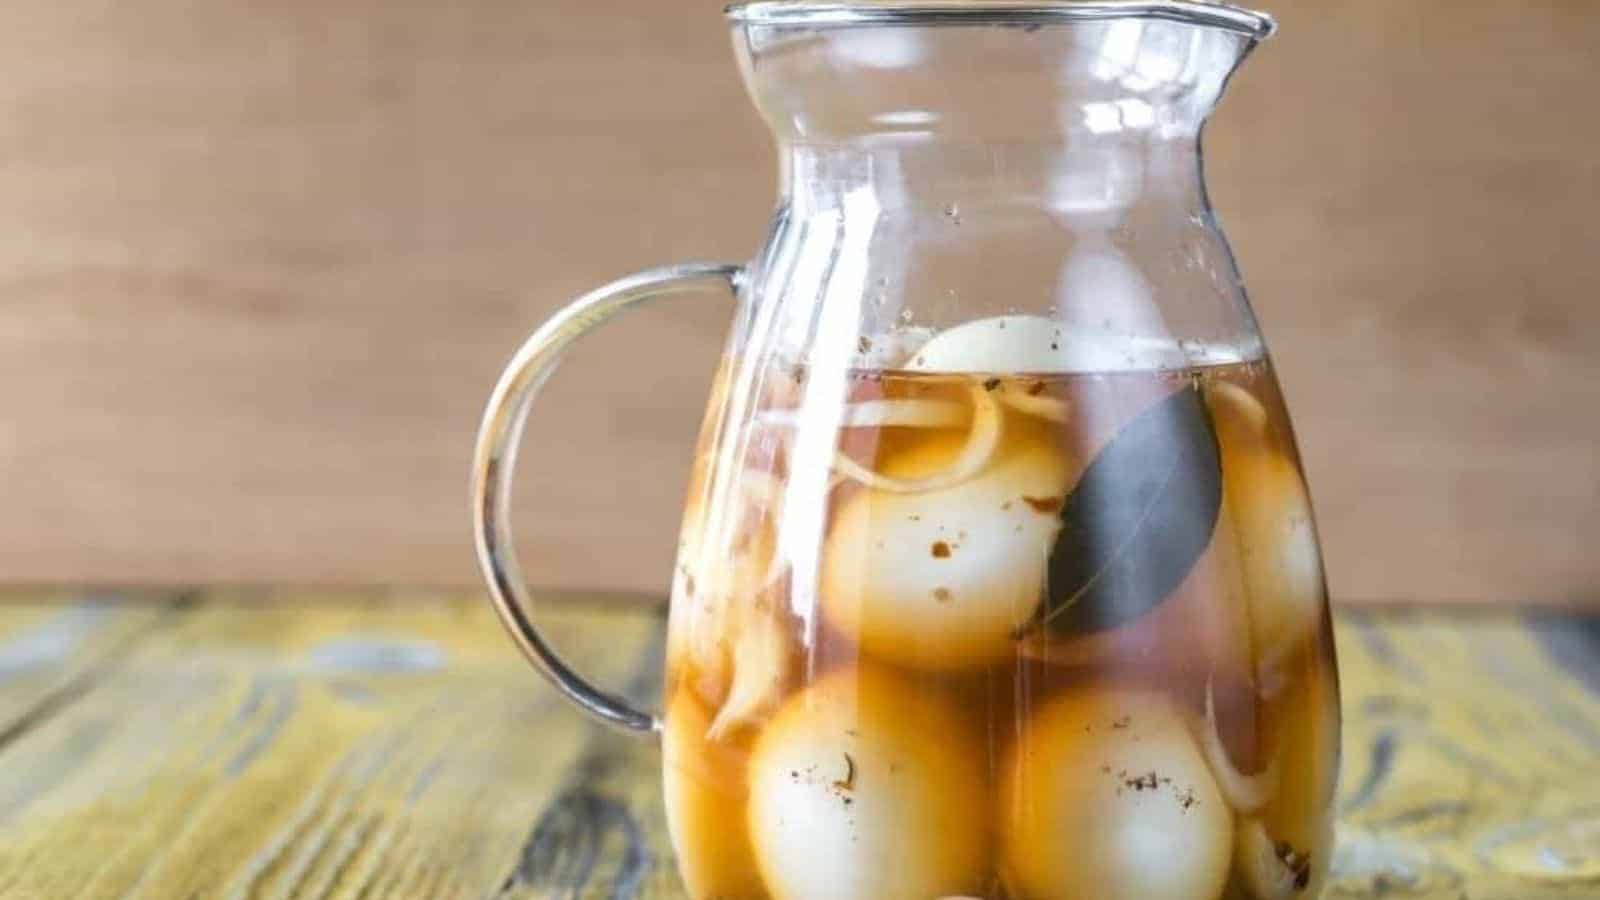 Pickled eggs in glass pitcher.